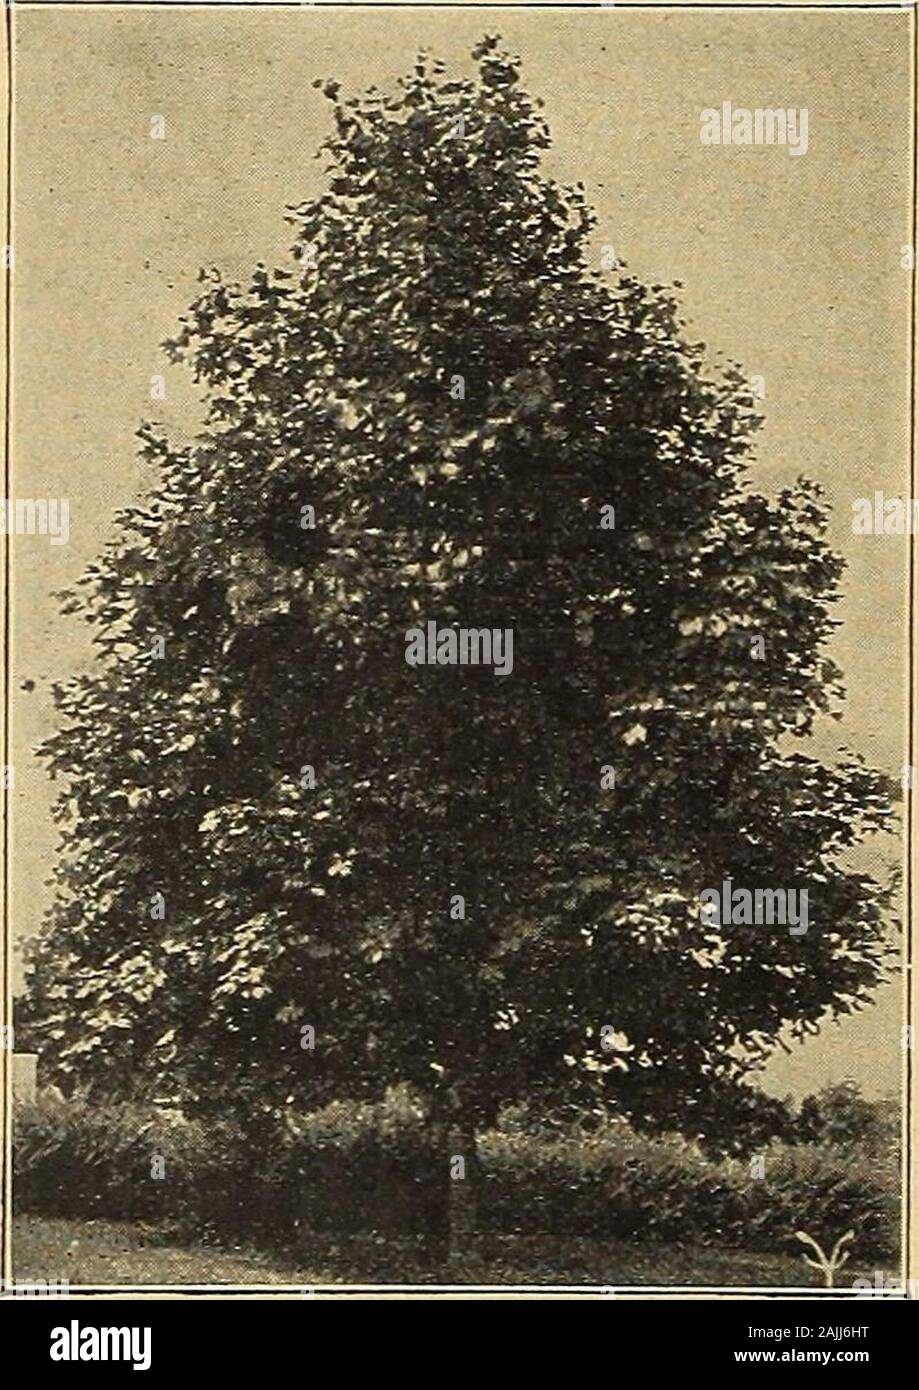 Vaughan's seed store . $2.00 each; 2in. cal., $3.00; 10 ft.. 2)4 in. $4.00; 10 to 12 ft., 3 in. cal., $6.00.Schwedleri (Schwedlers Purple-Leaved Maple.) A handsome treewith beautiful foliage, in the spring a purplish crimson changing to dark green during the summer and fading to tones of purple, red and brown in the fall. Has the same characteristics as the Norway Maple. 8 to 10 ft., $2.25 each; 8 to 10 ft. 2 in. cal., $3.25. Silver Maple. (Dasycarpum.) Very fast grower, makes dense shade and thrives in anysoil. We offer especially fine trees for street planting. 6 to 8 ft., 80c; S to 10 ft., Stock Photo